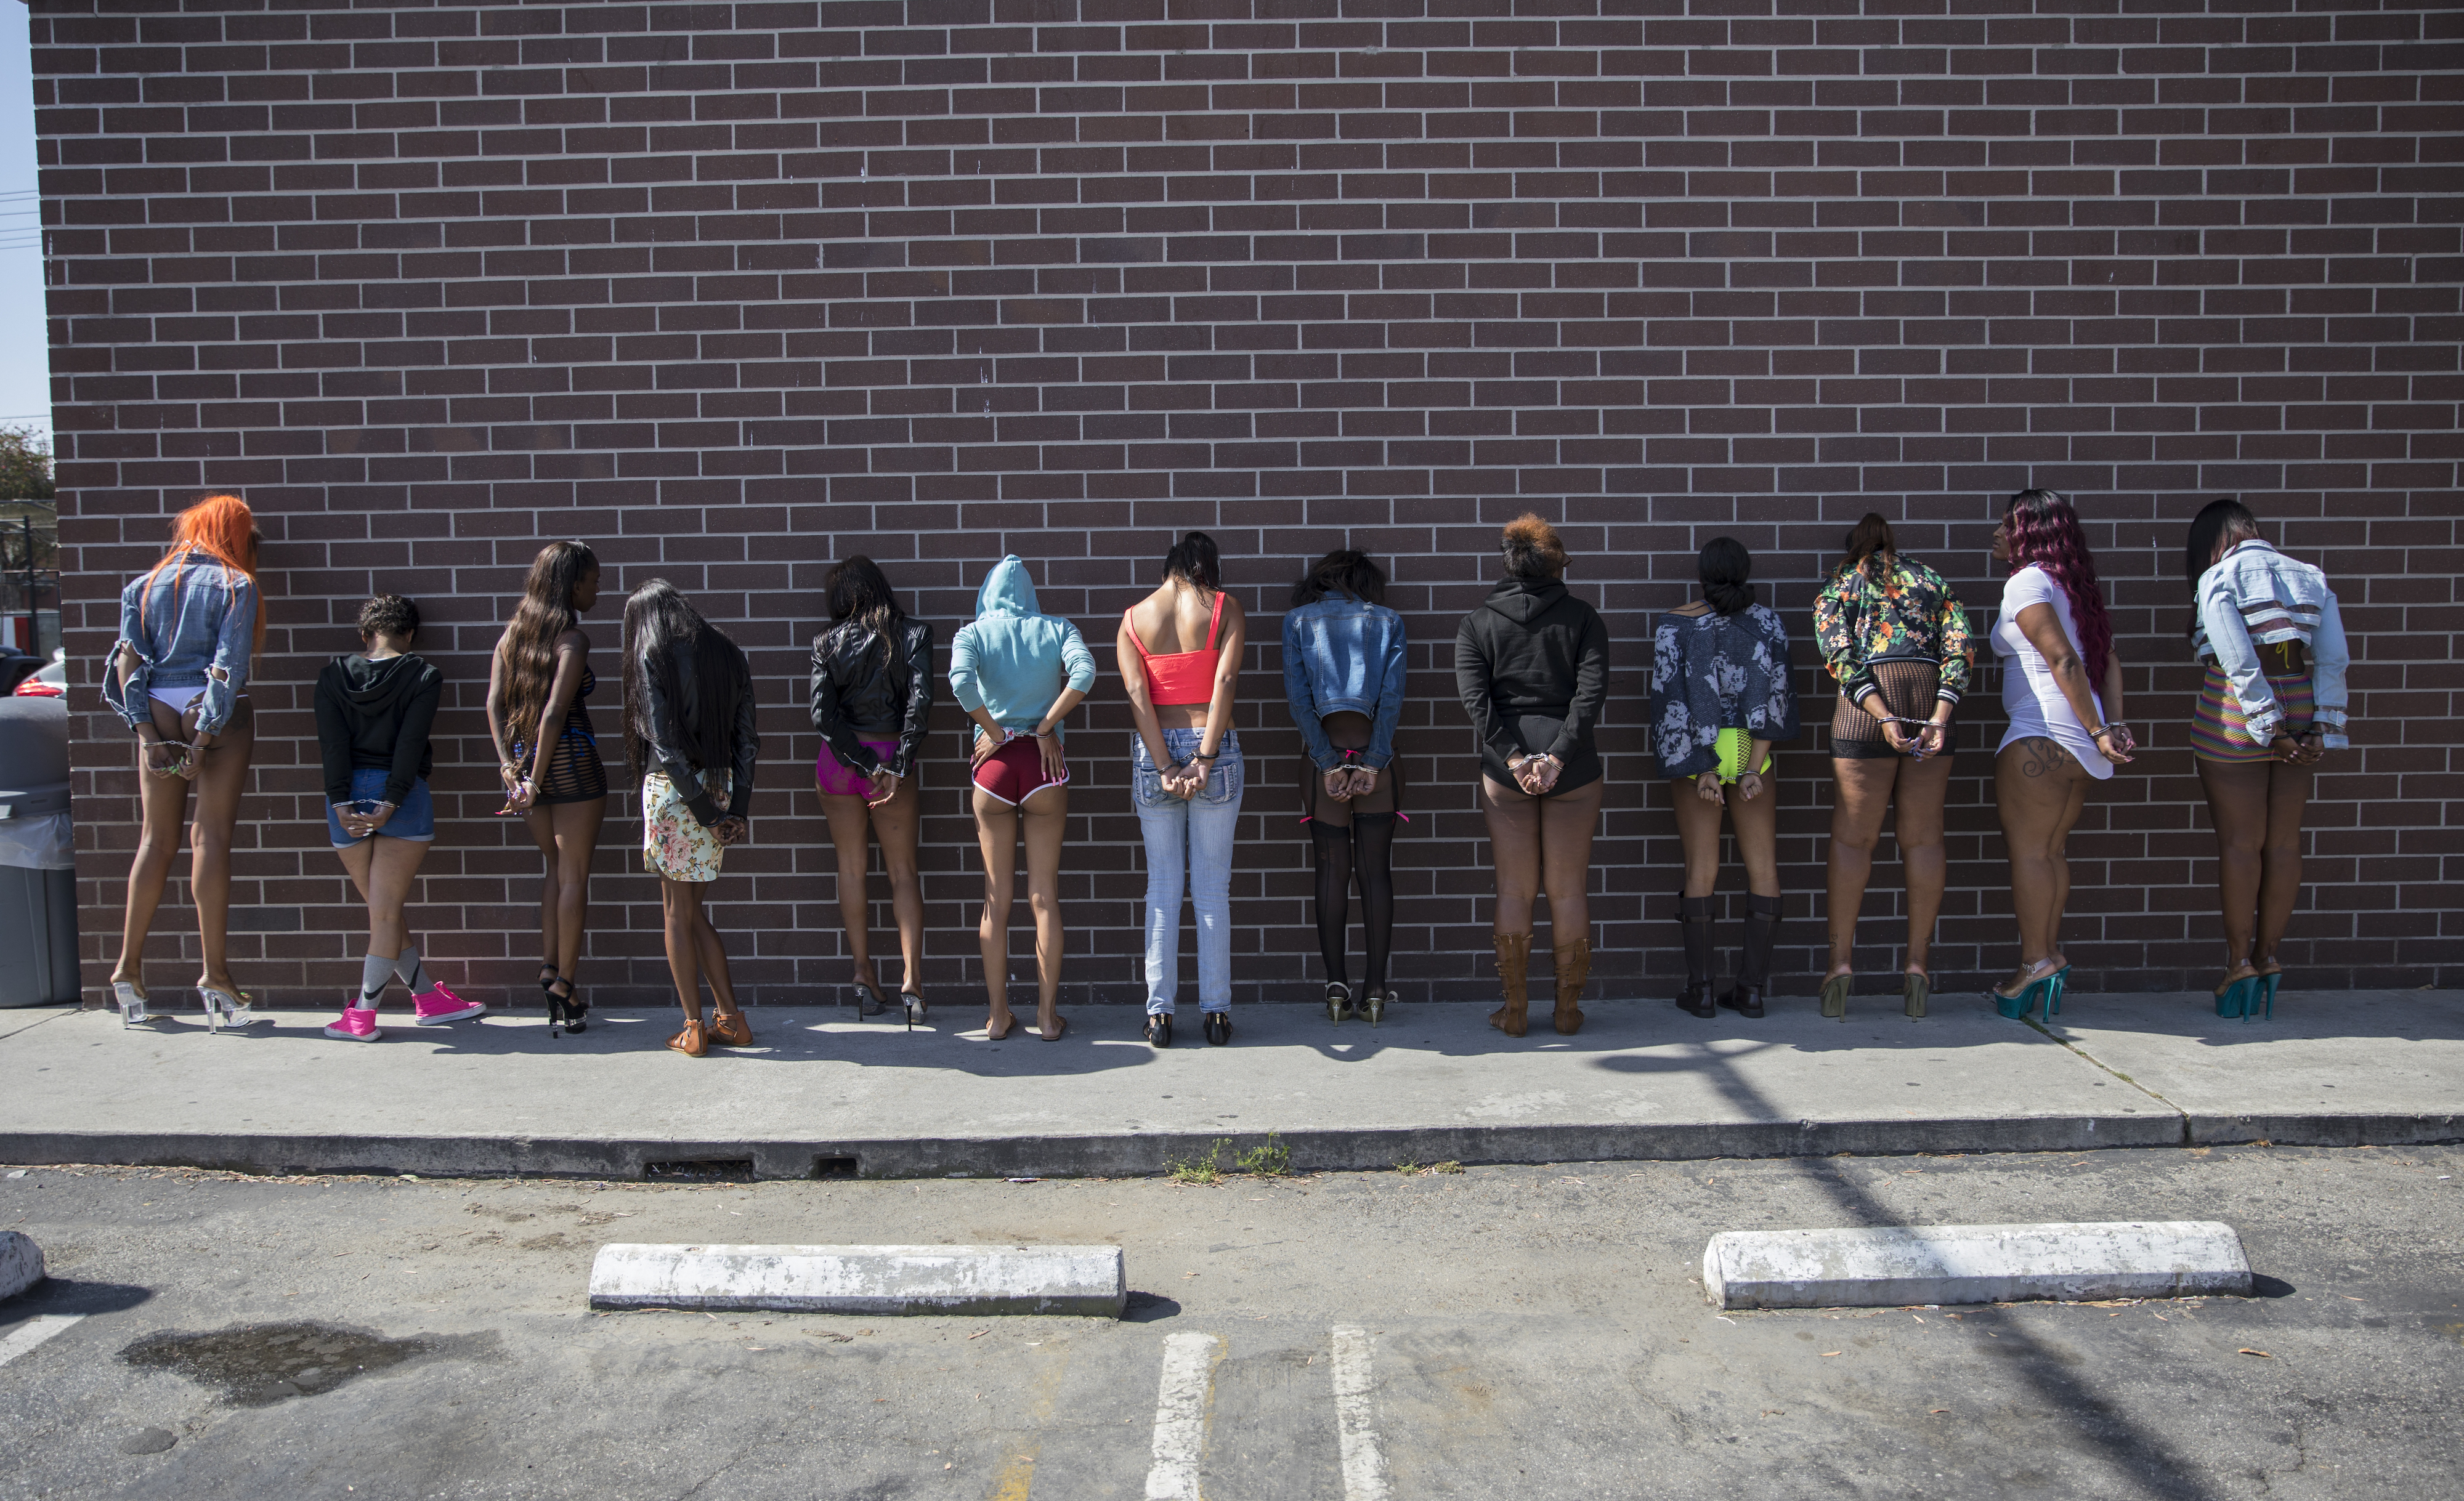 Officers of the  Los Angeles Police Department's vice squad prepare thirteen women for transportation after being arrested for prostitution May 18, 2017 in the southeast area of Los Angeles, California. (Robert Nickelsberg/Getty Images)